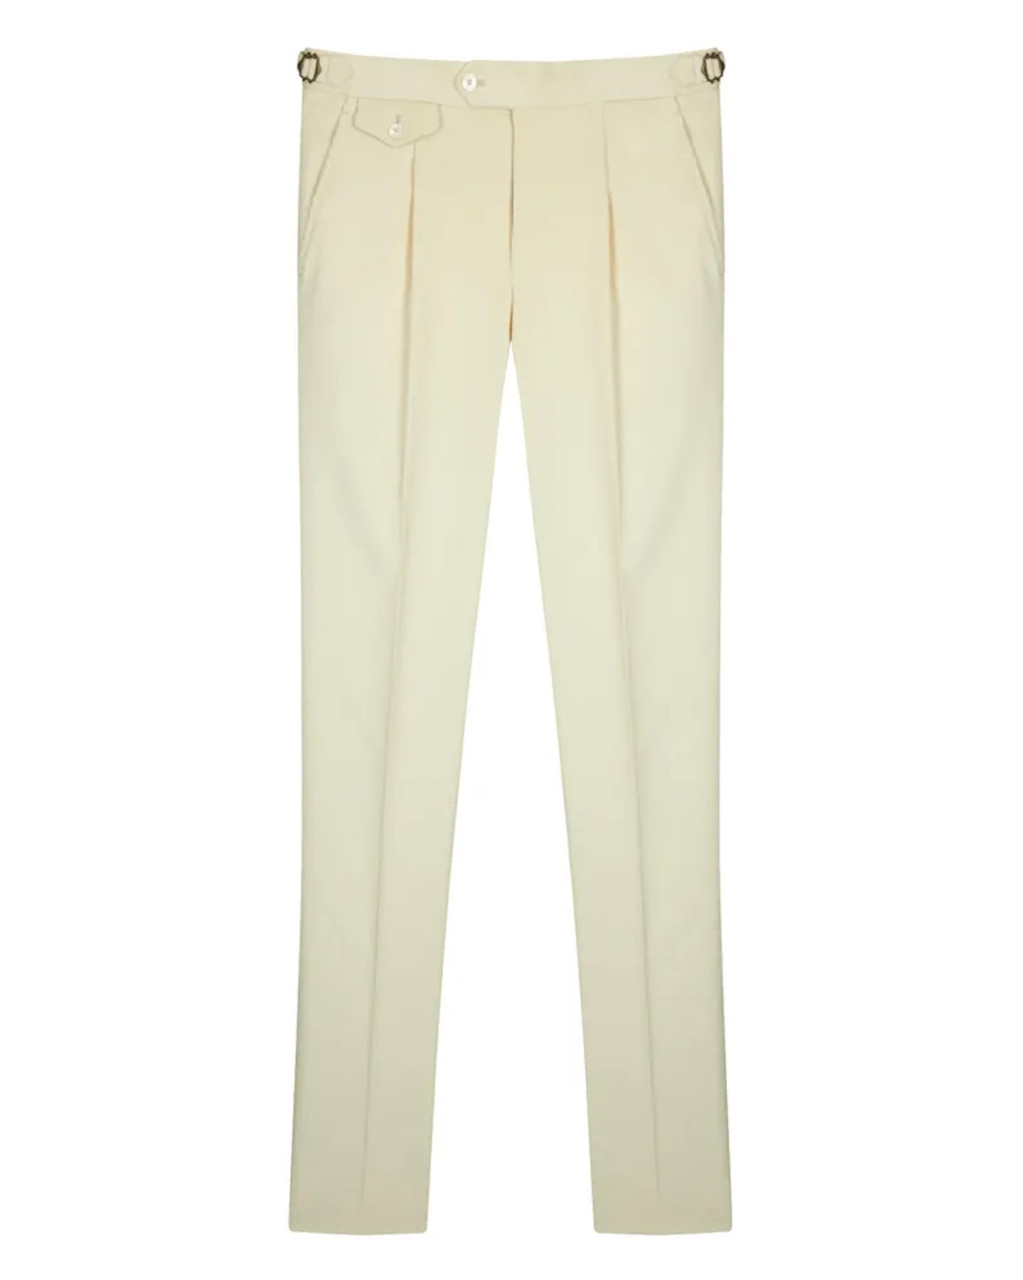 Department 5 Cotton Stratch Flared Pants women - Glamood Outlet